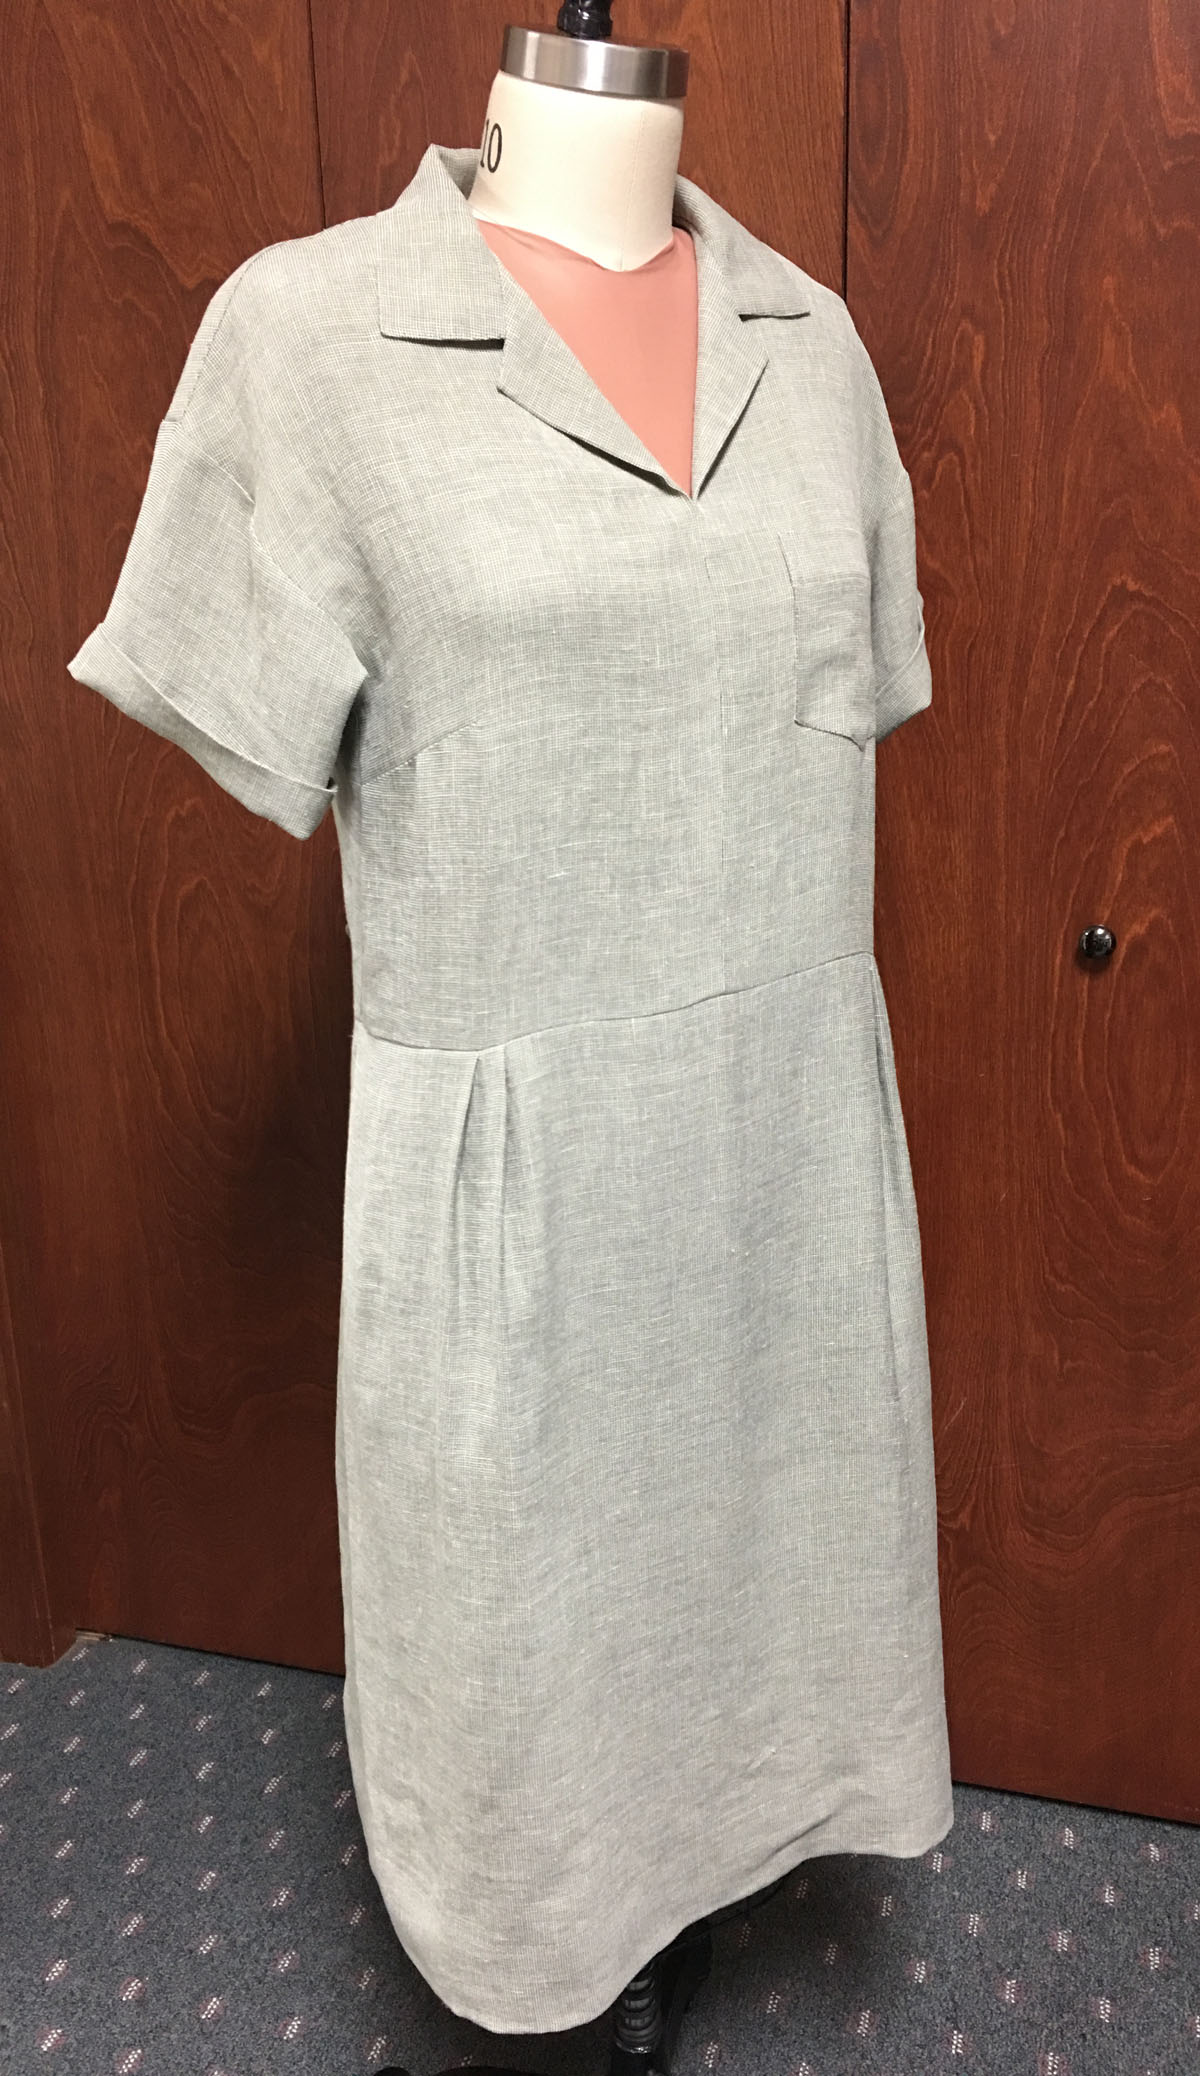 Sewing self-care: a favorite unworn linen dress, front, will be shortened into a top